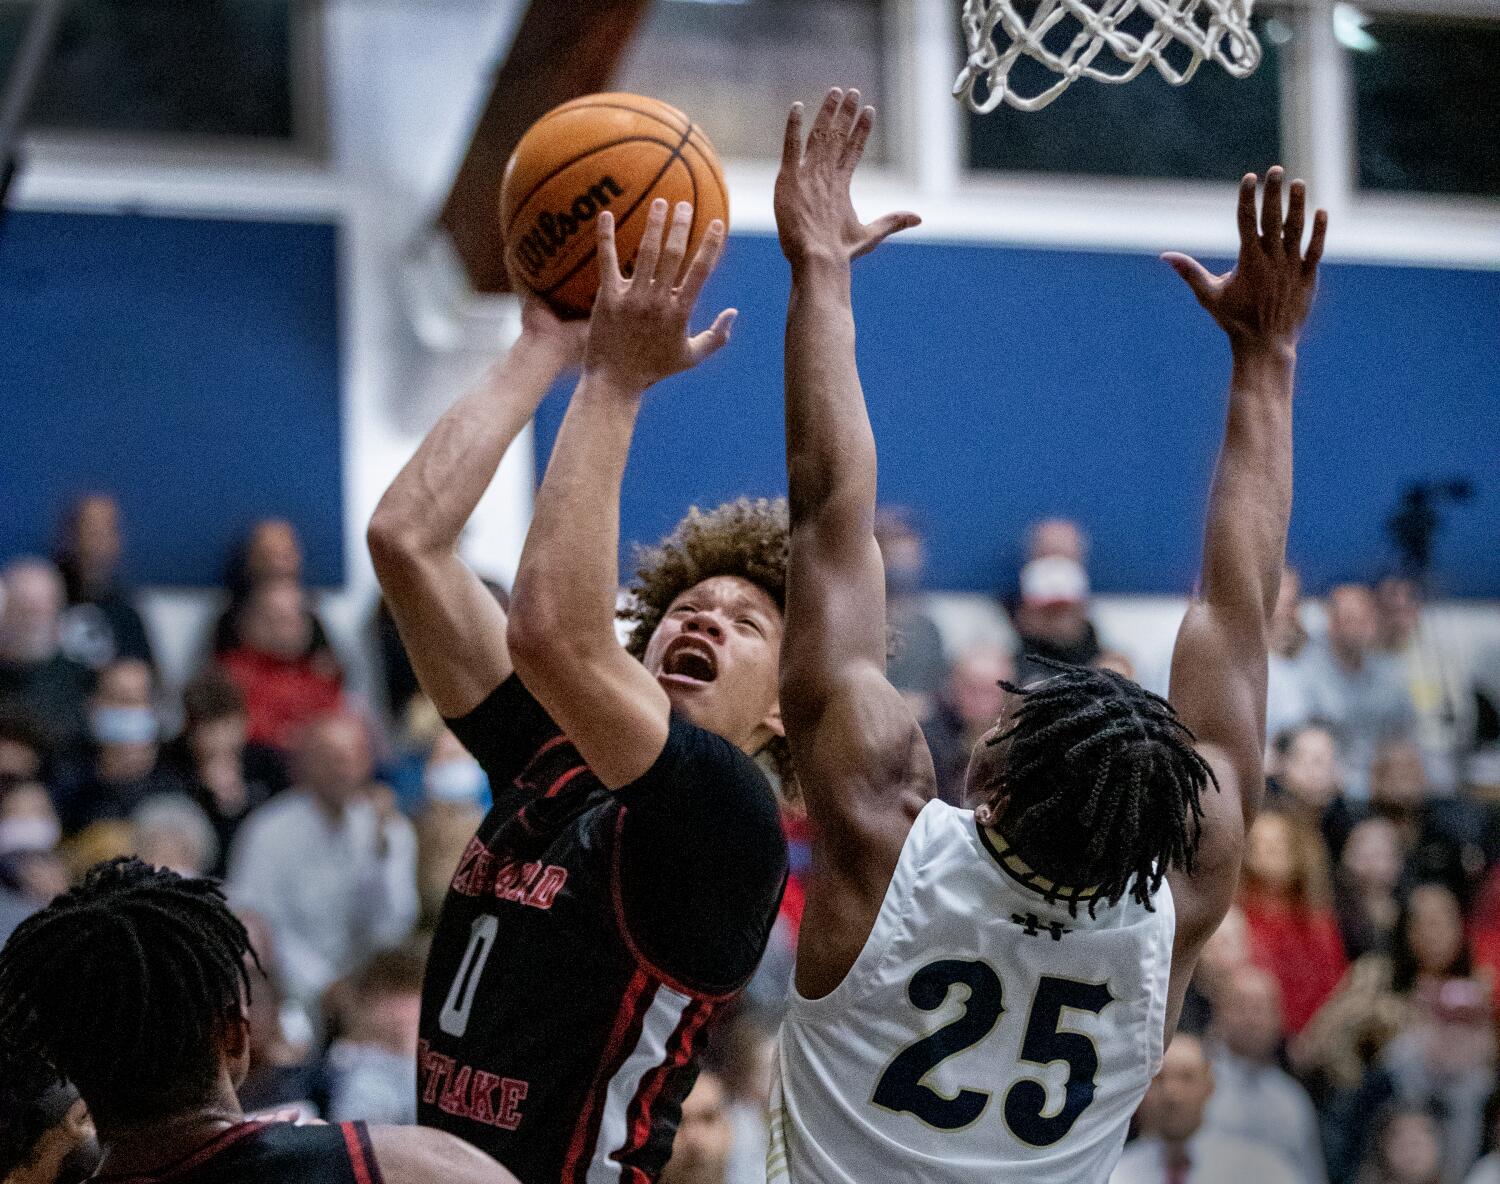 Harvard-Westlake standout point guard Trent Perry commits to USC